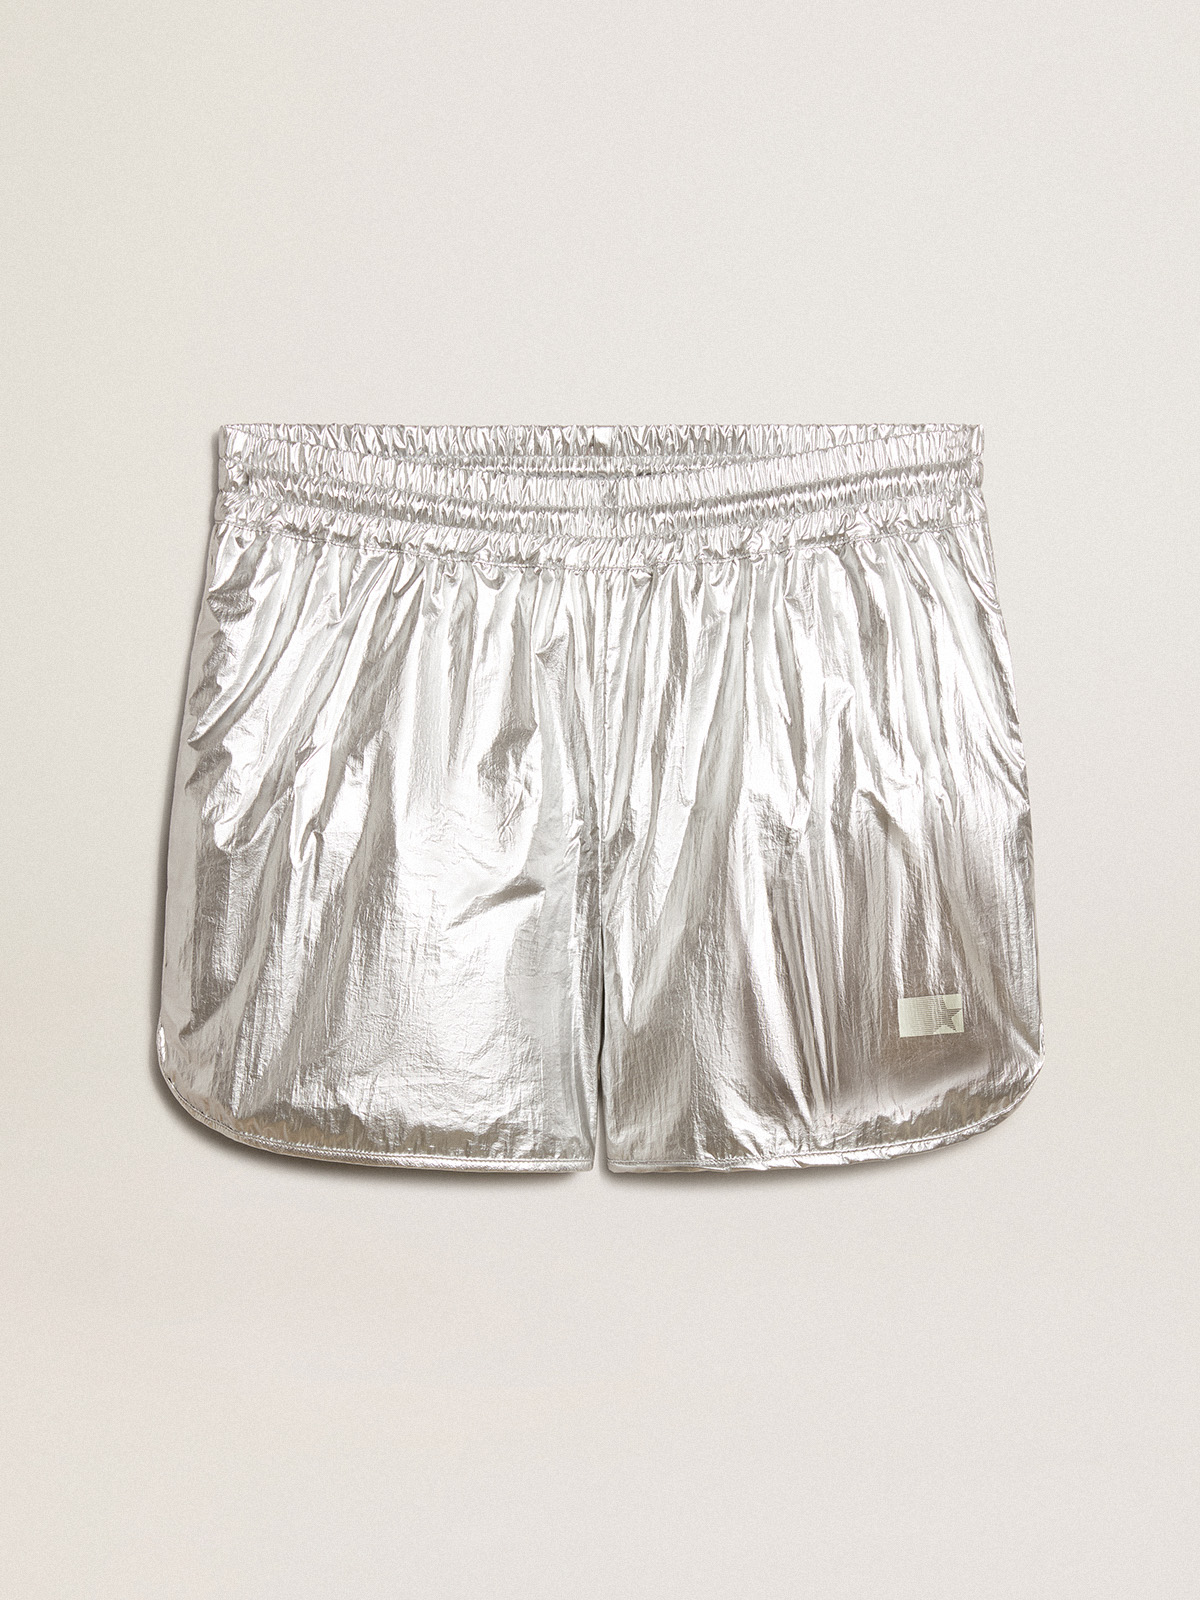 Women's Running Shorts (073 - Particle Grey/Reflective Silver